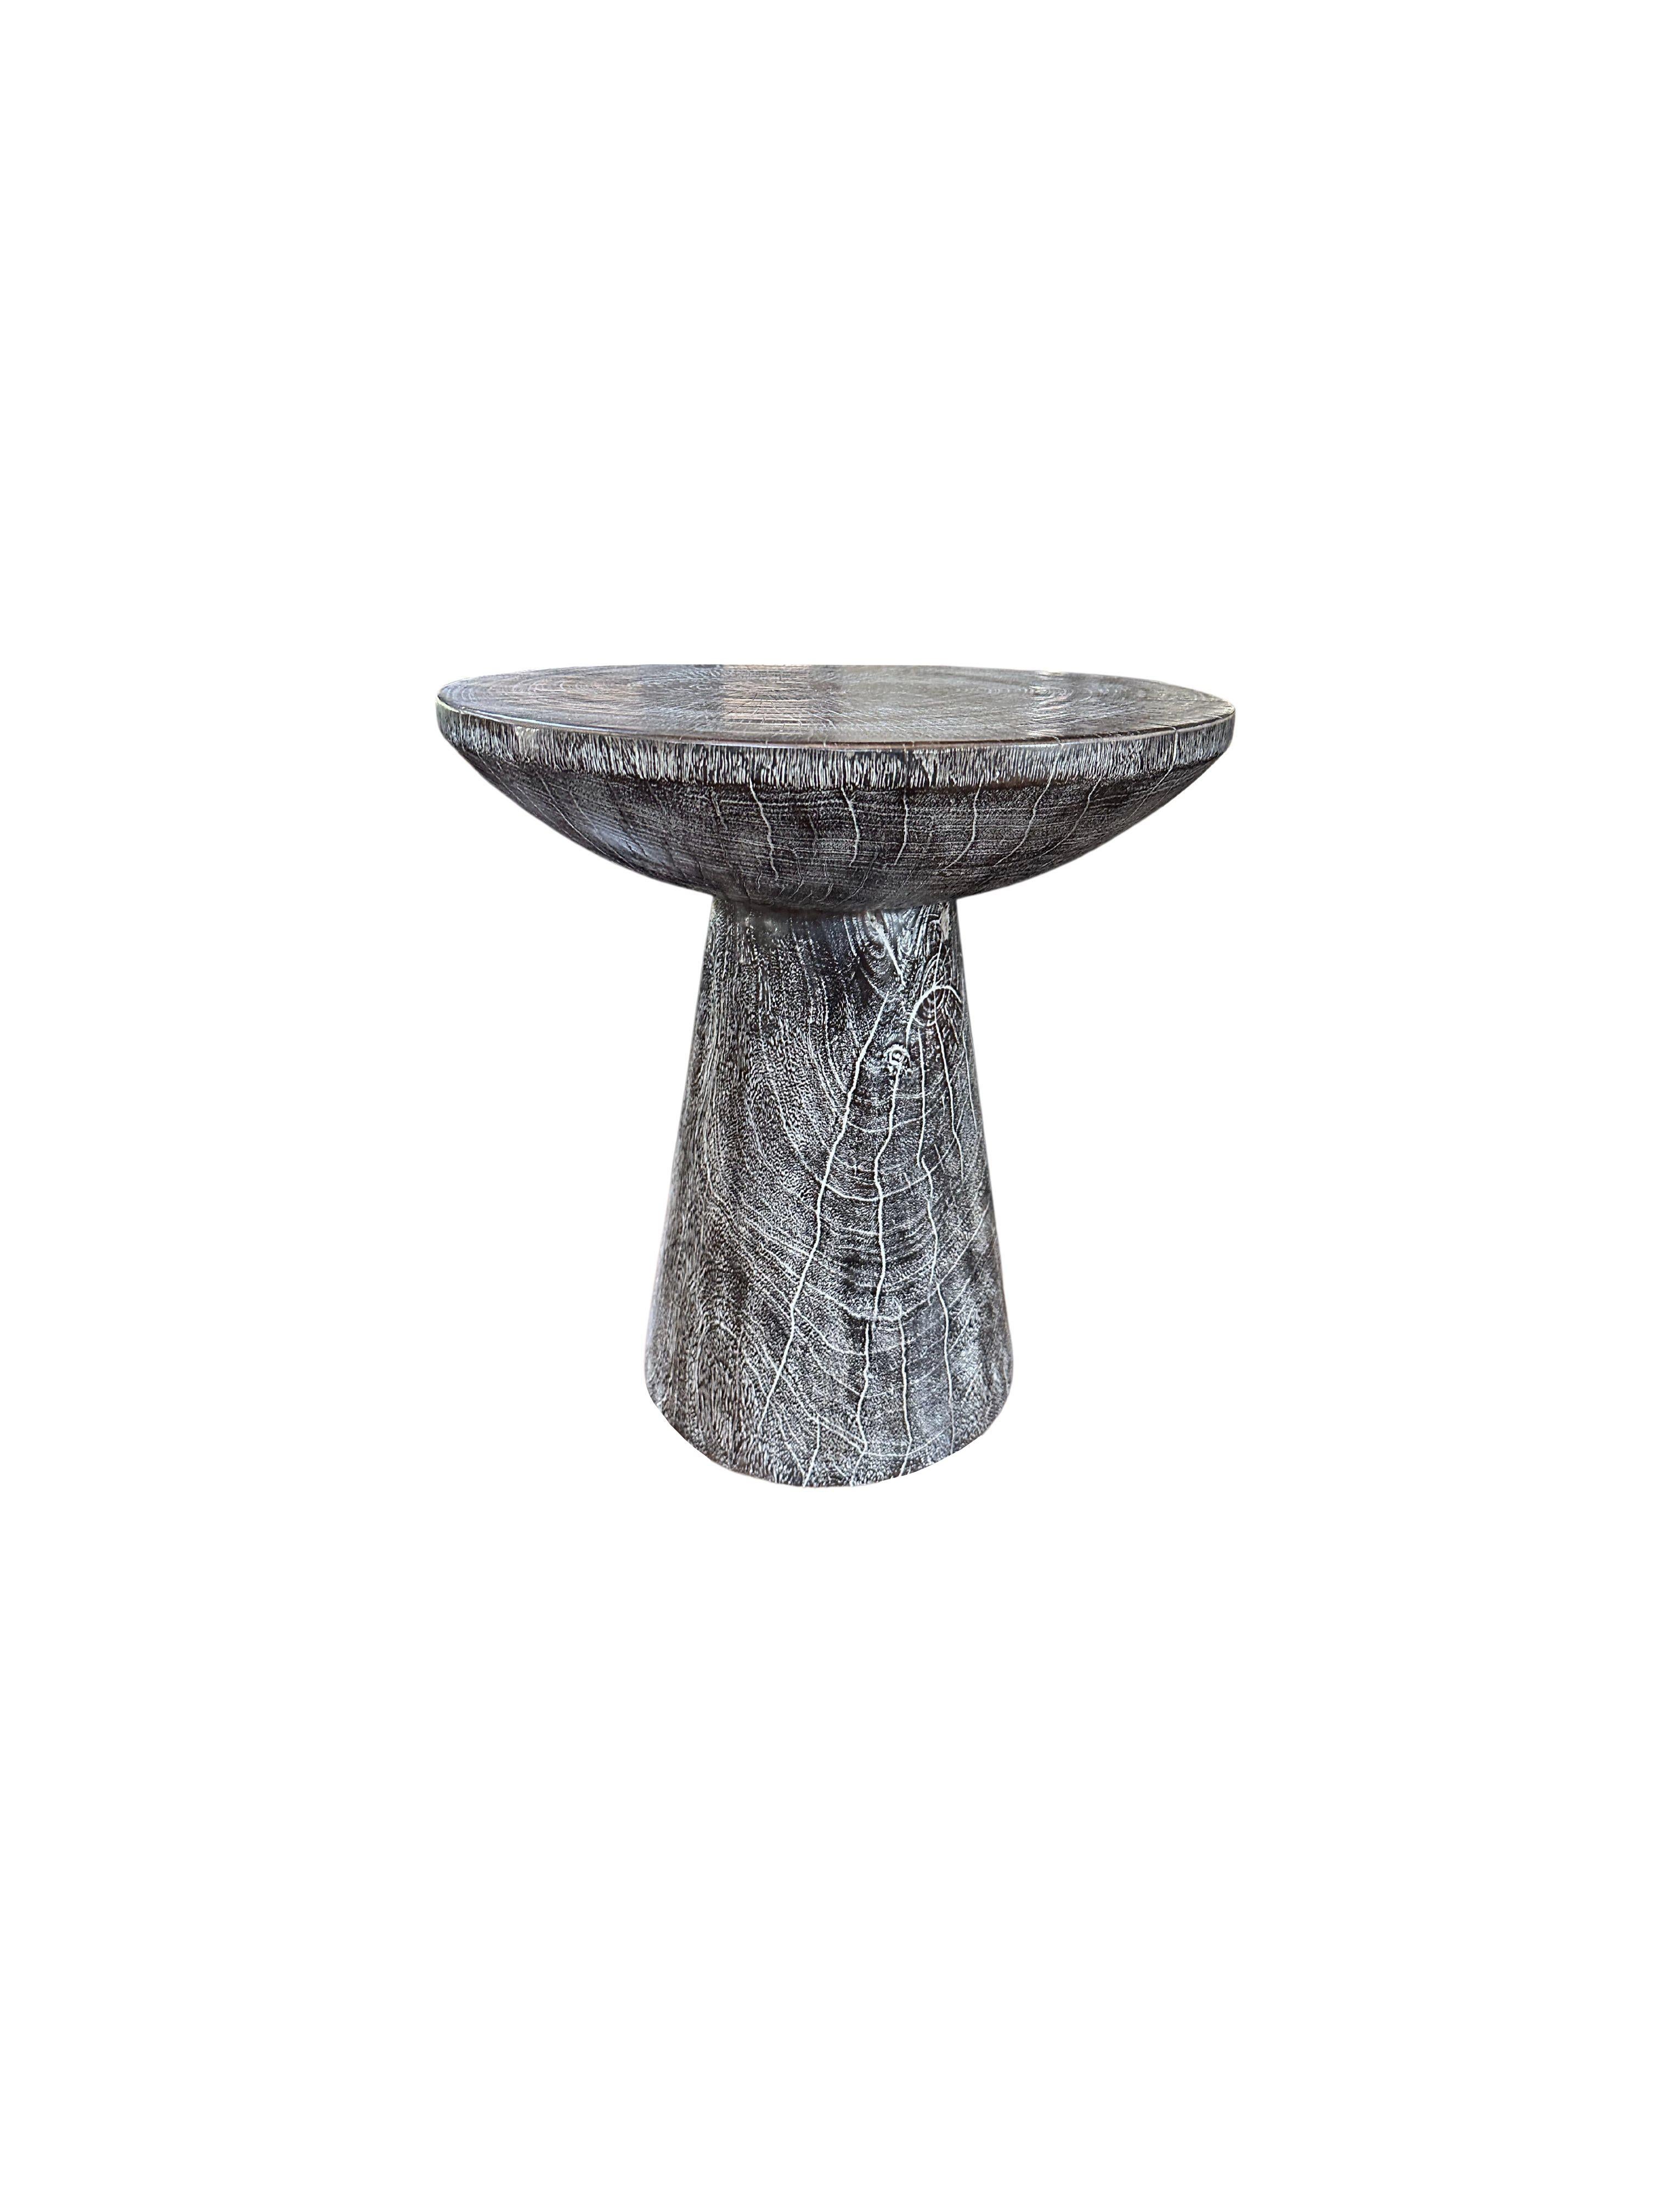 Organic Modern Round Side Table Crafted from Mango Wood Washed out Finish For Sale